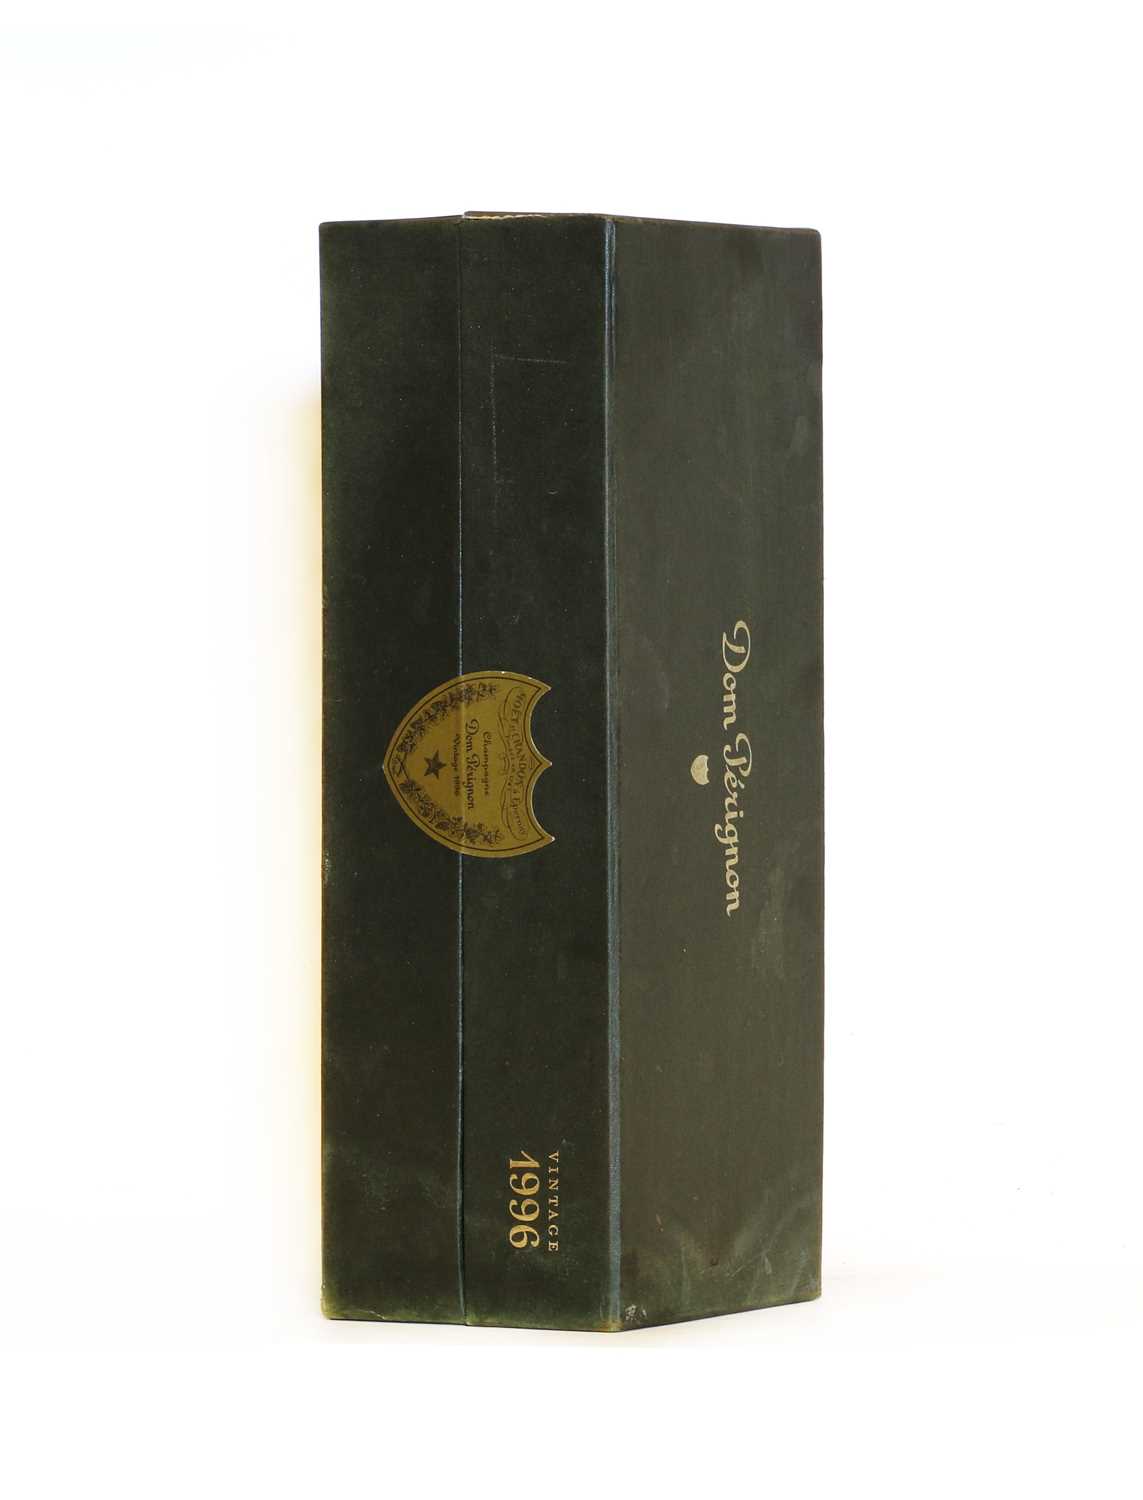 Lot 25 - Dom Perignon, Epernay, 1996, one bottle (boxed)